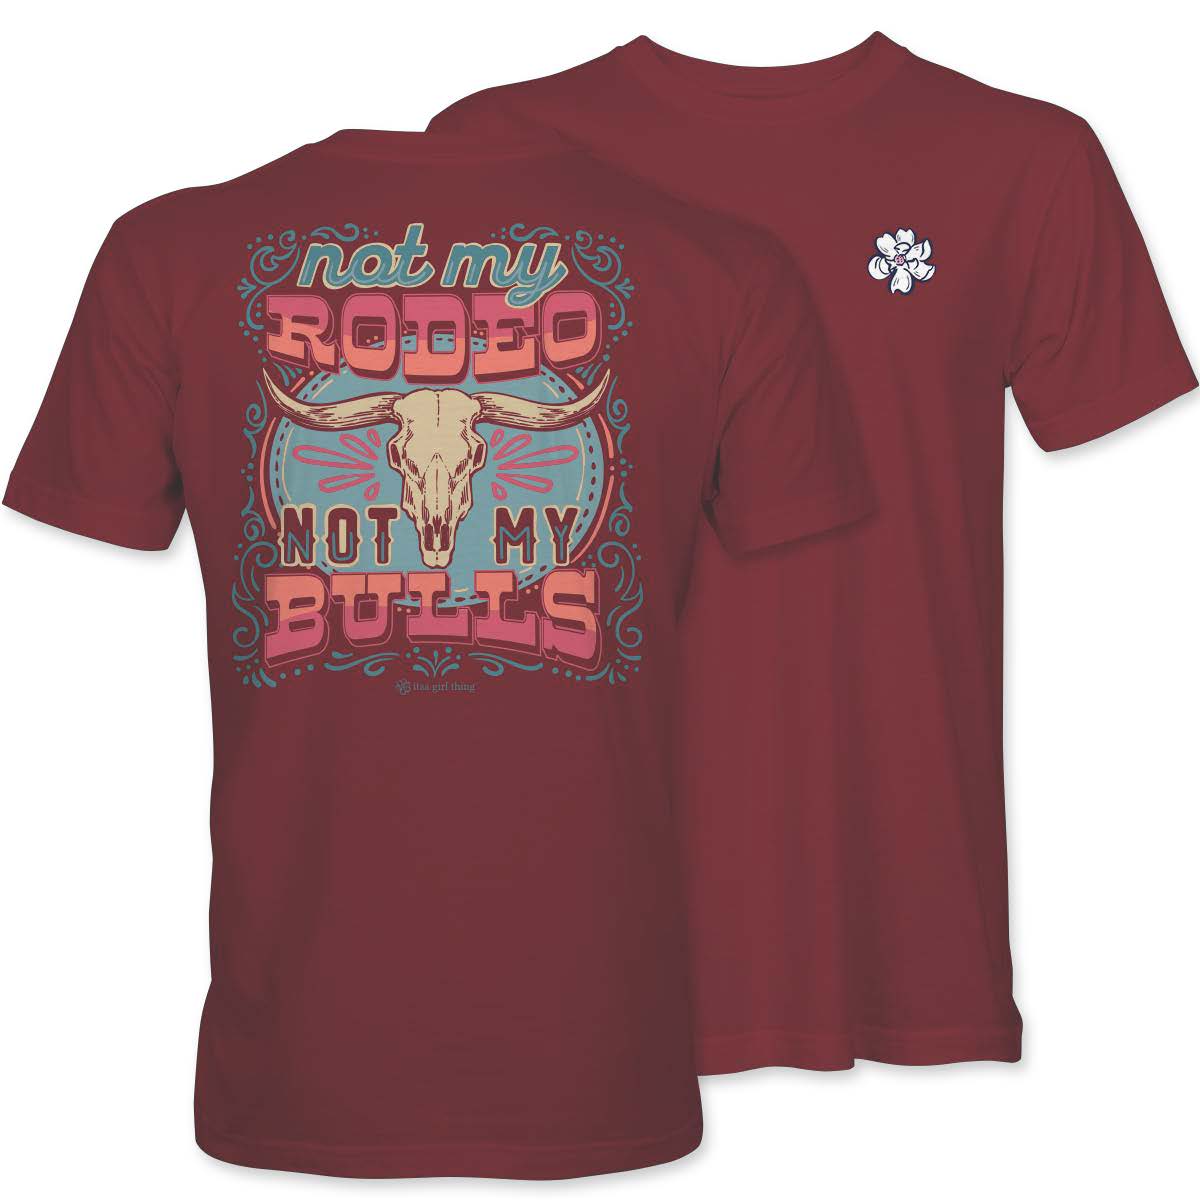 Not My Rodeo- Southern Phrase T-Shirt